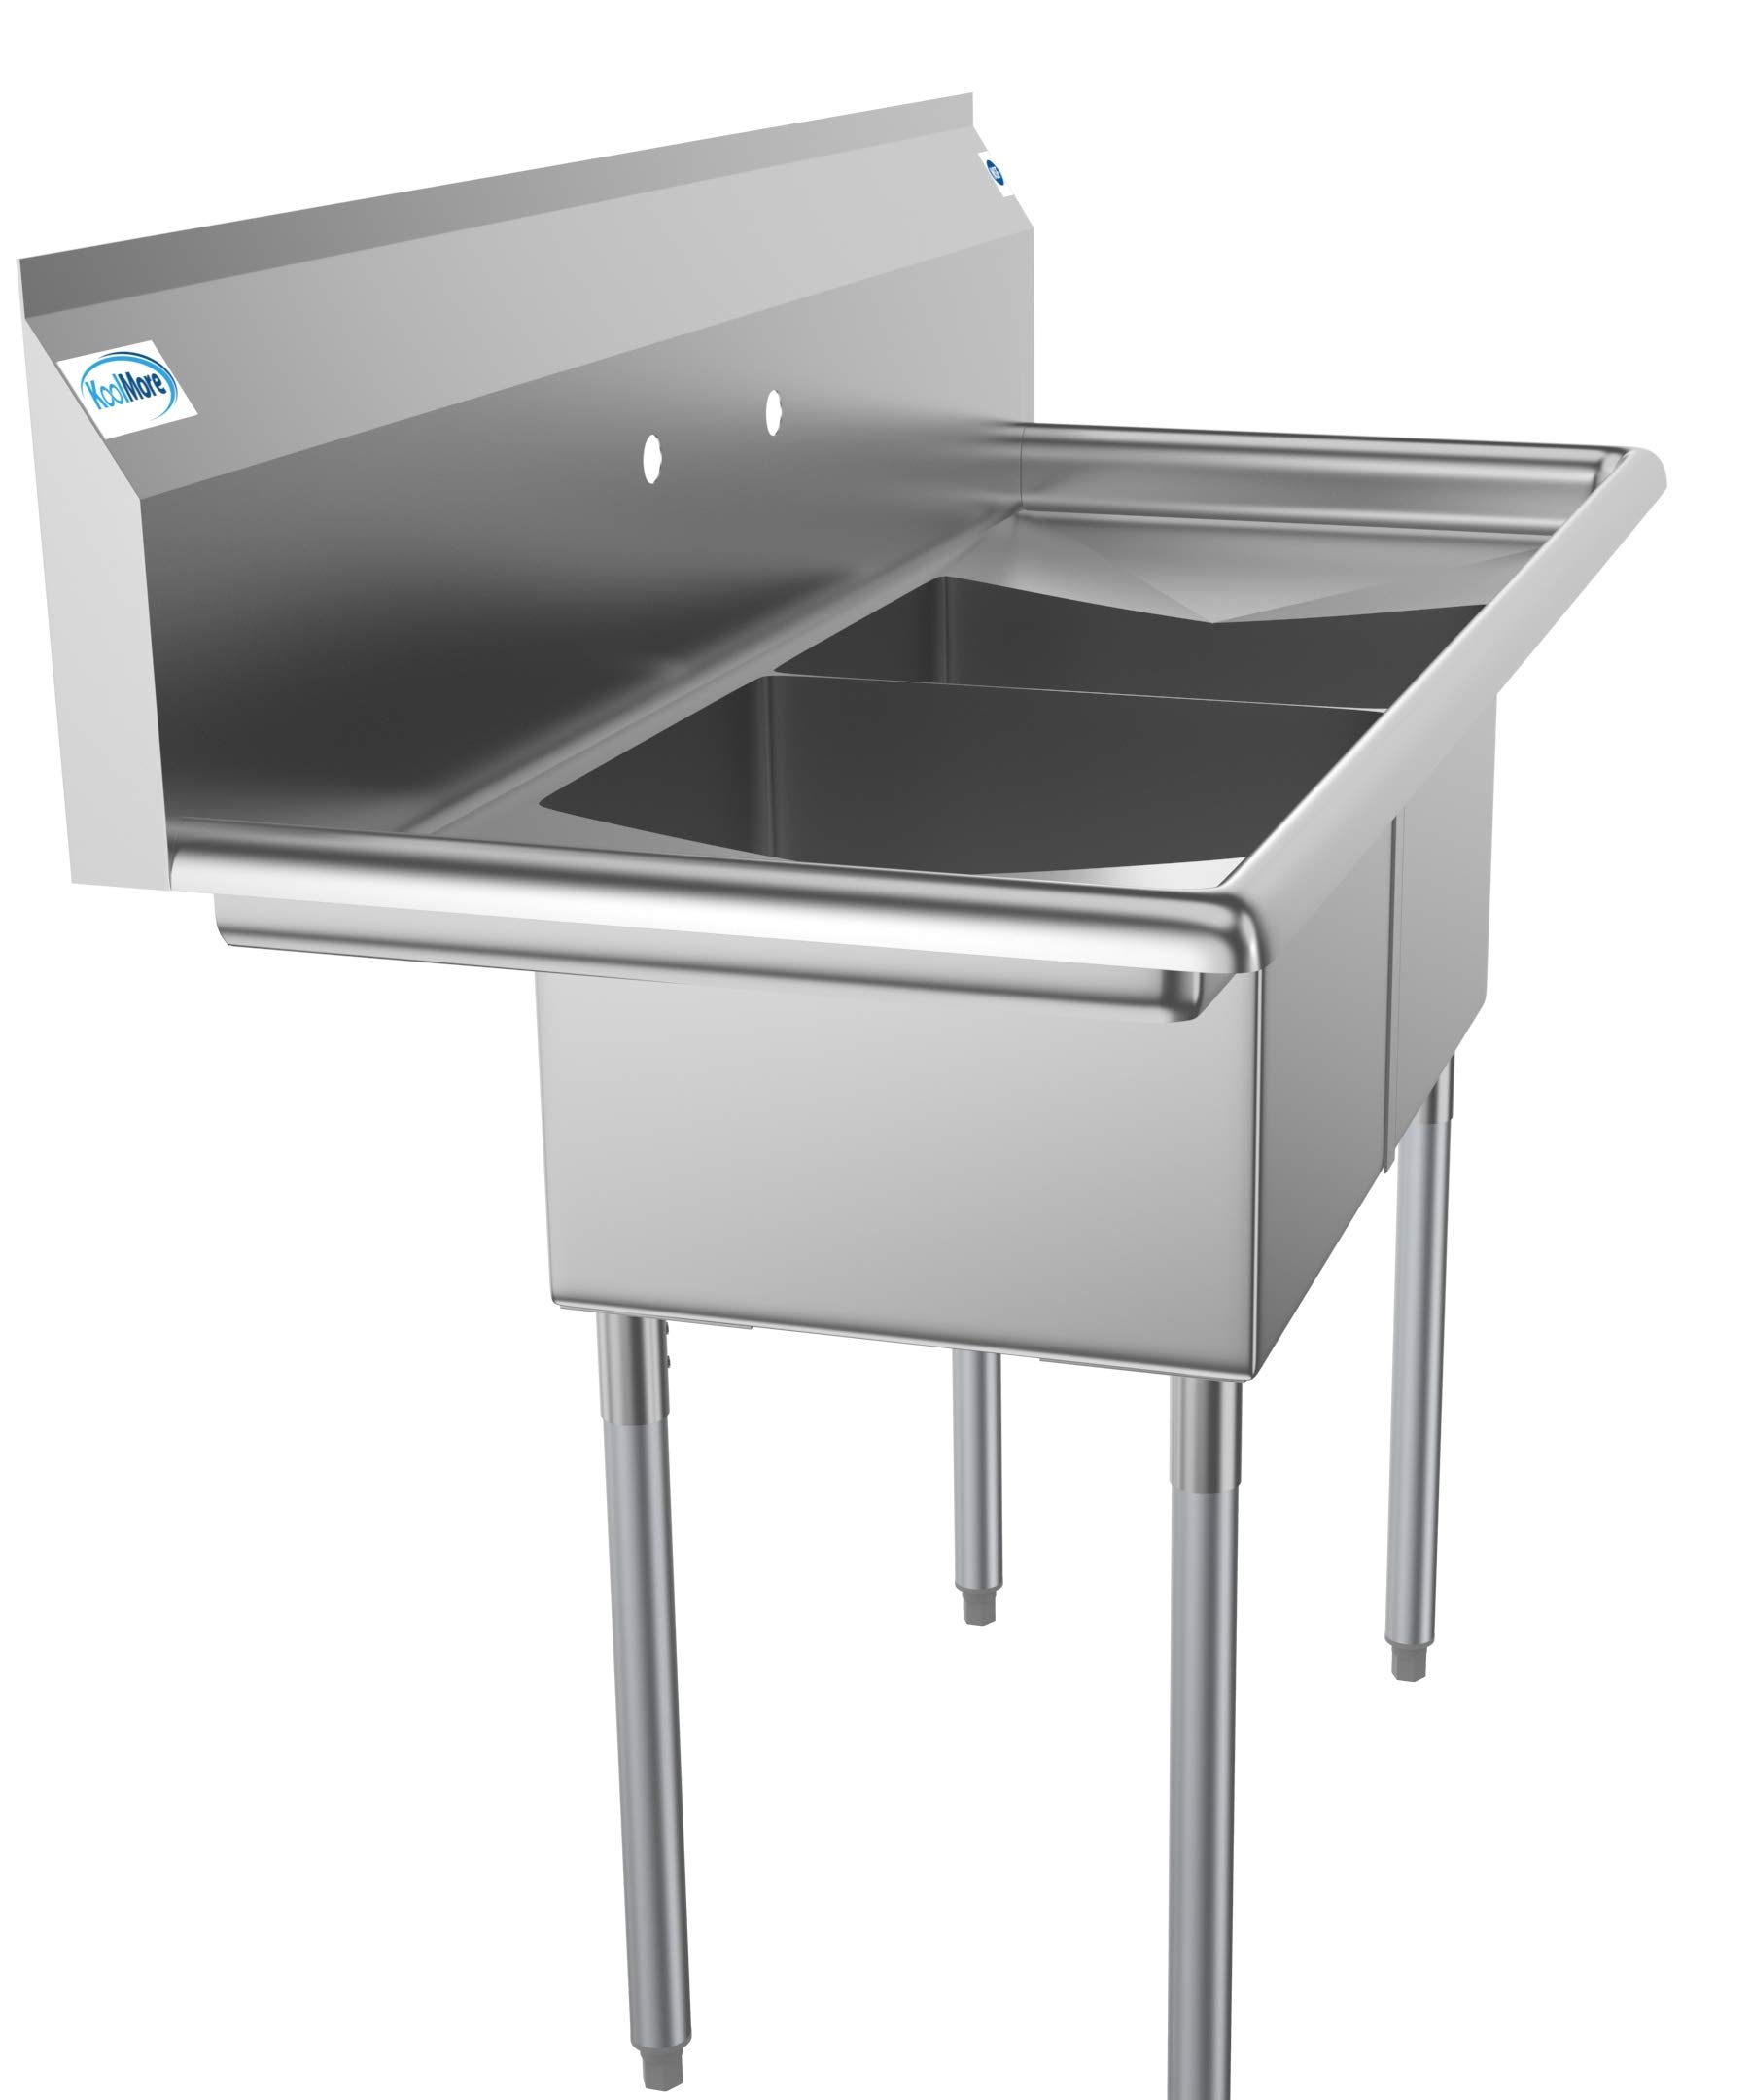 KoolMore - SB141611-12B3 2 Compartment Stainless Steel NSF Commercial Kitchen Prep & Utility Sink with 2 Drainboards - Bowl Size 14" x 16" x 11", Silver